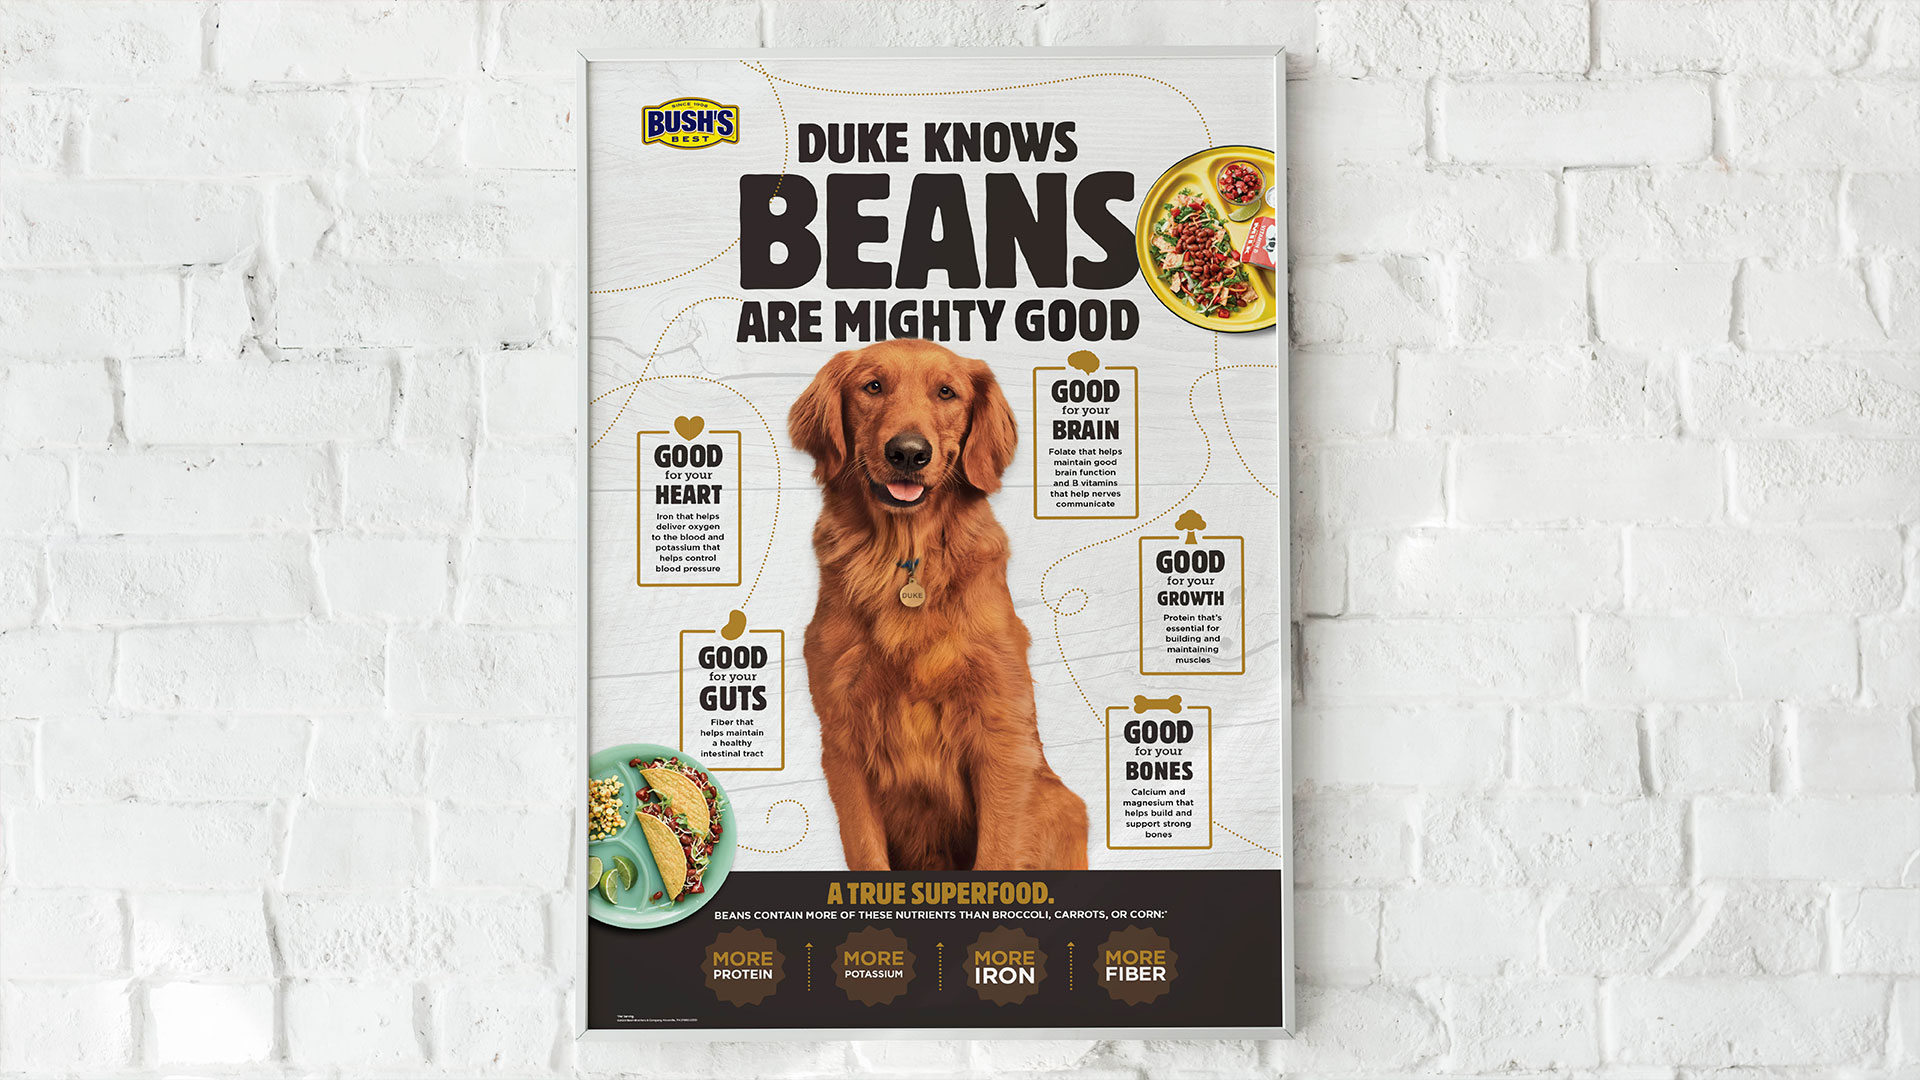 Bush’s K-12 Duke Knows Beans are Mighty Good Poster